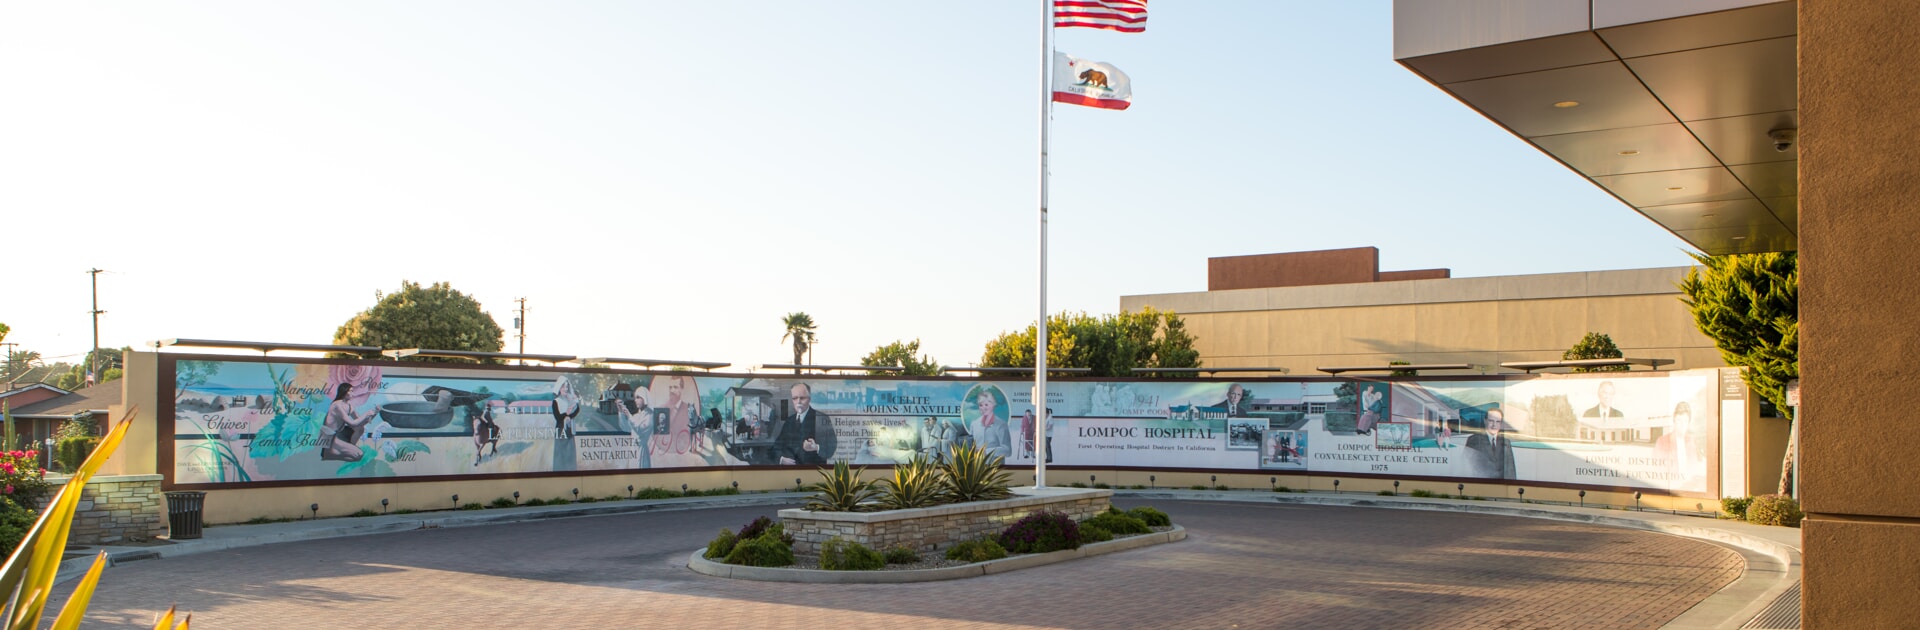 Lompoc Mural - History of Health Care in Lompoc, located at 1515 East Ocean Avenue in the Lompoc Valley Medical Center entry driveway